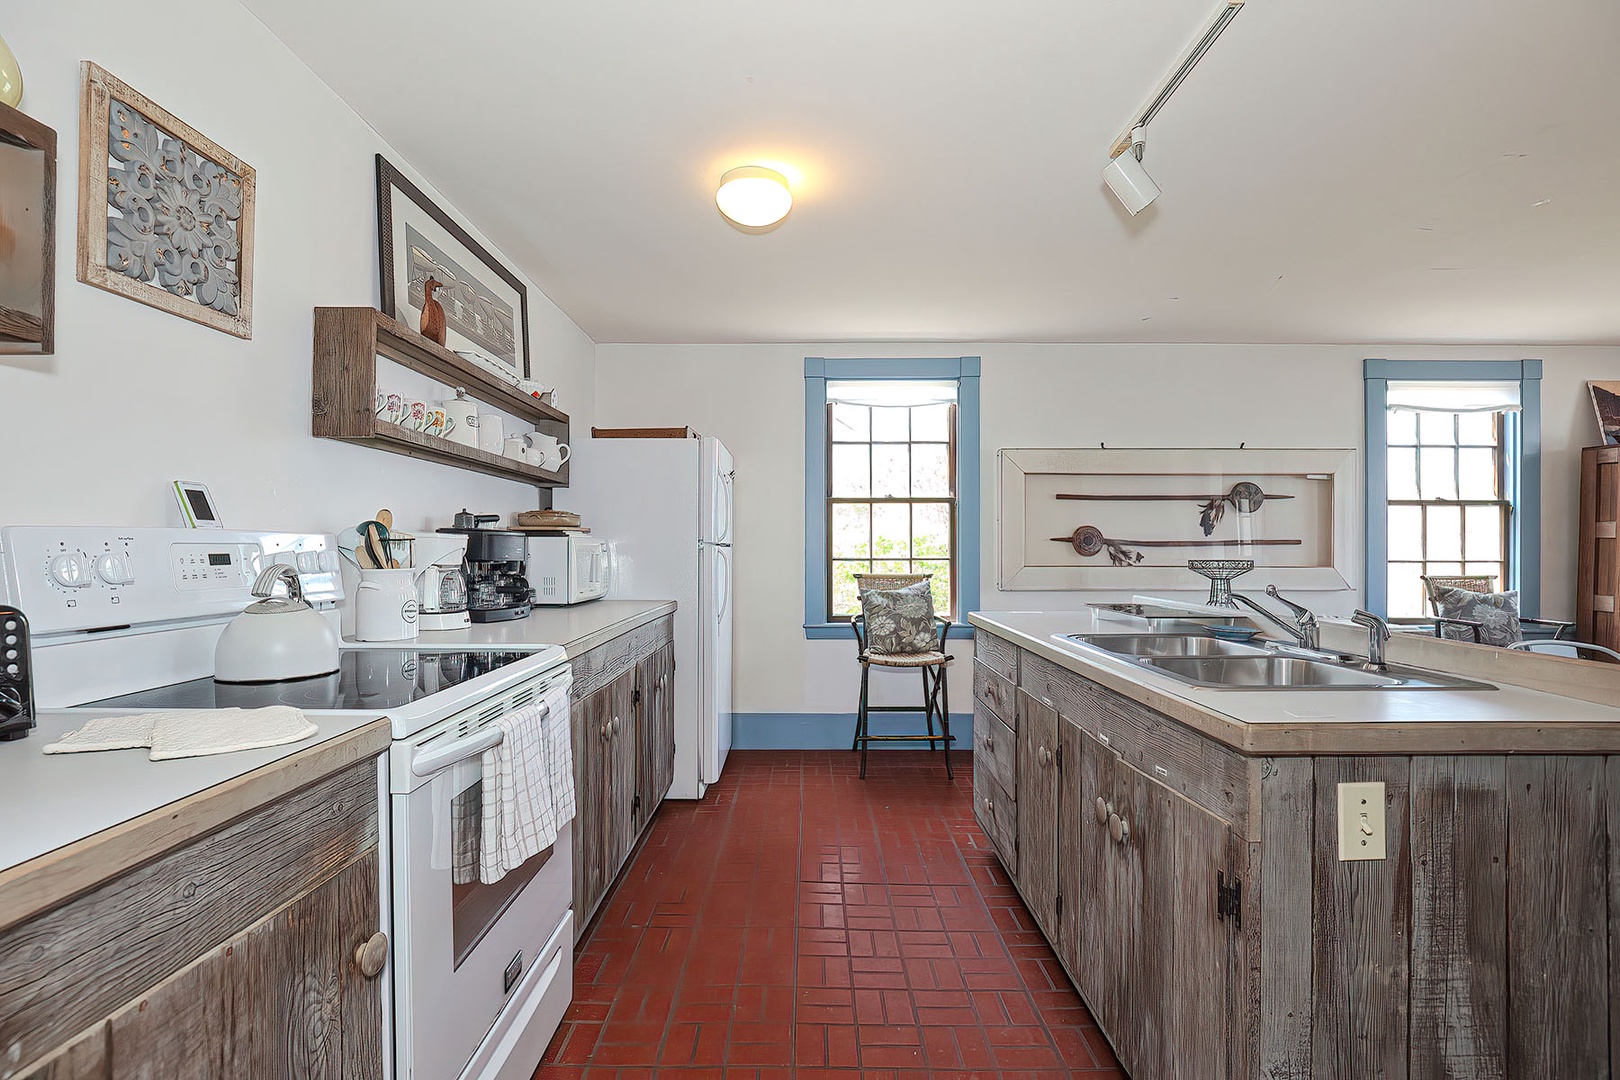 The "galley" kitchen doesn't feel small in this space.